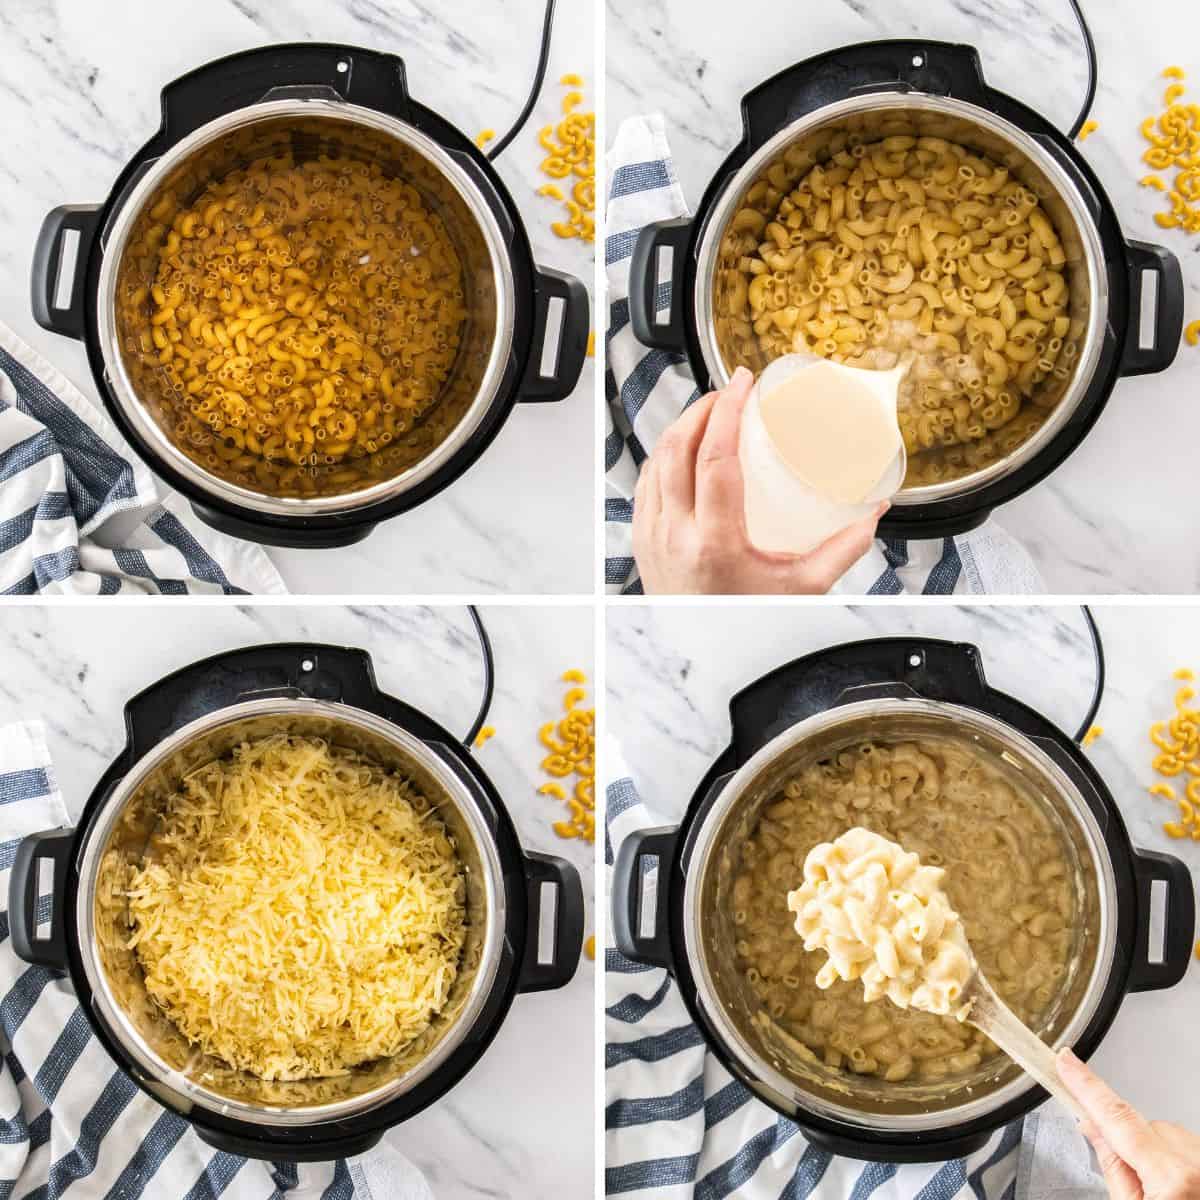 4 photos showing how to make macaroni and cheese in an Instant Pot.